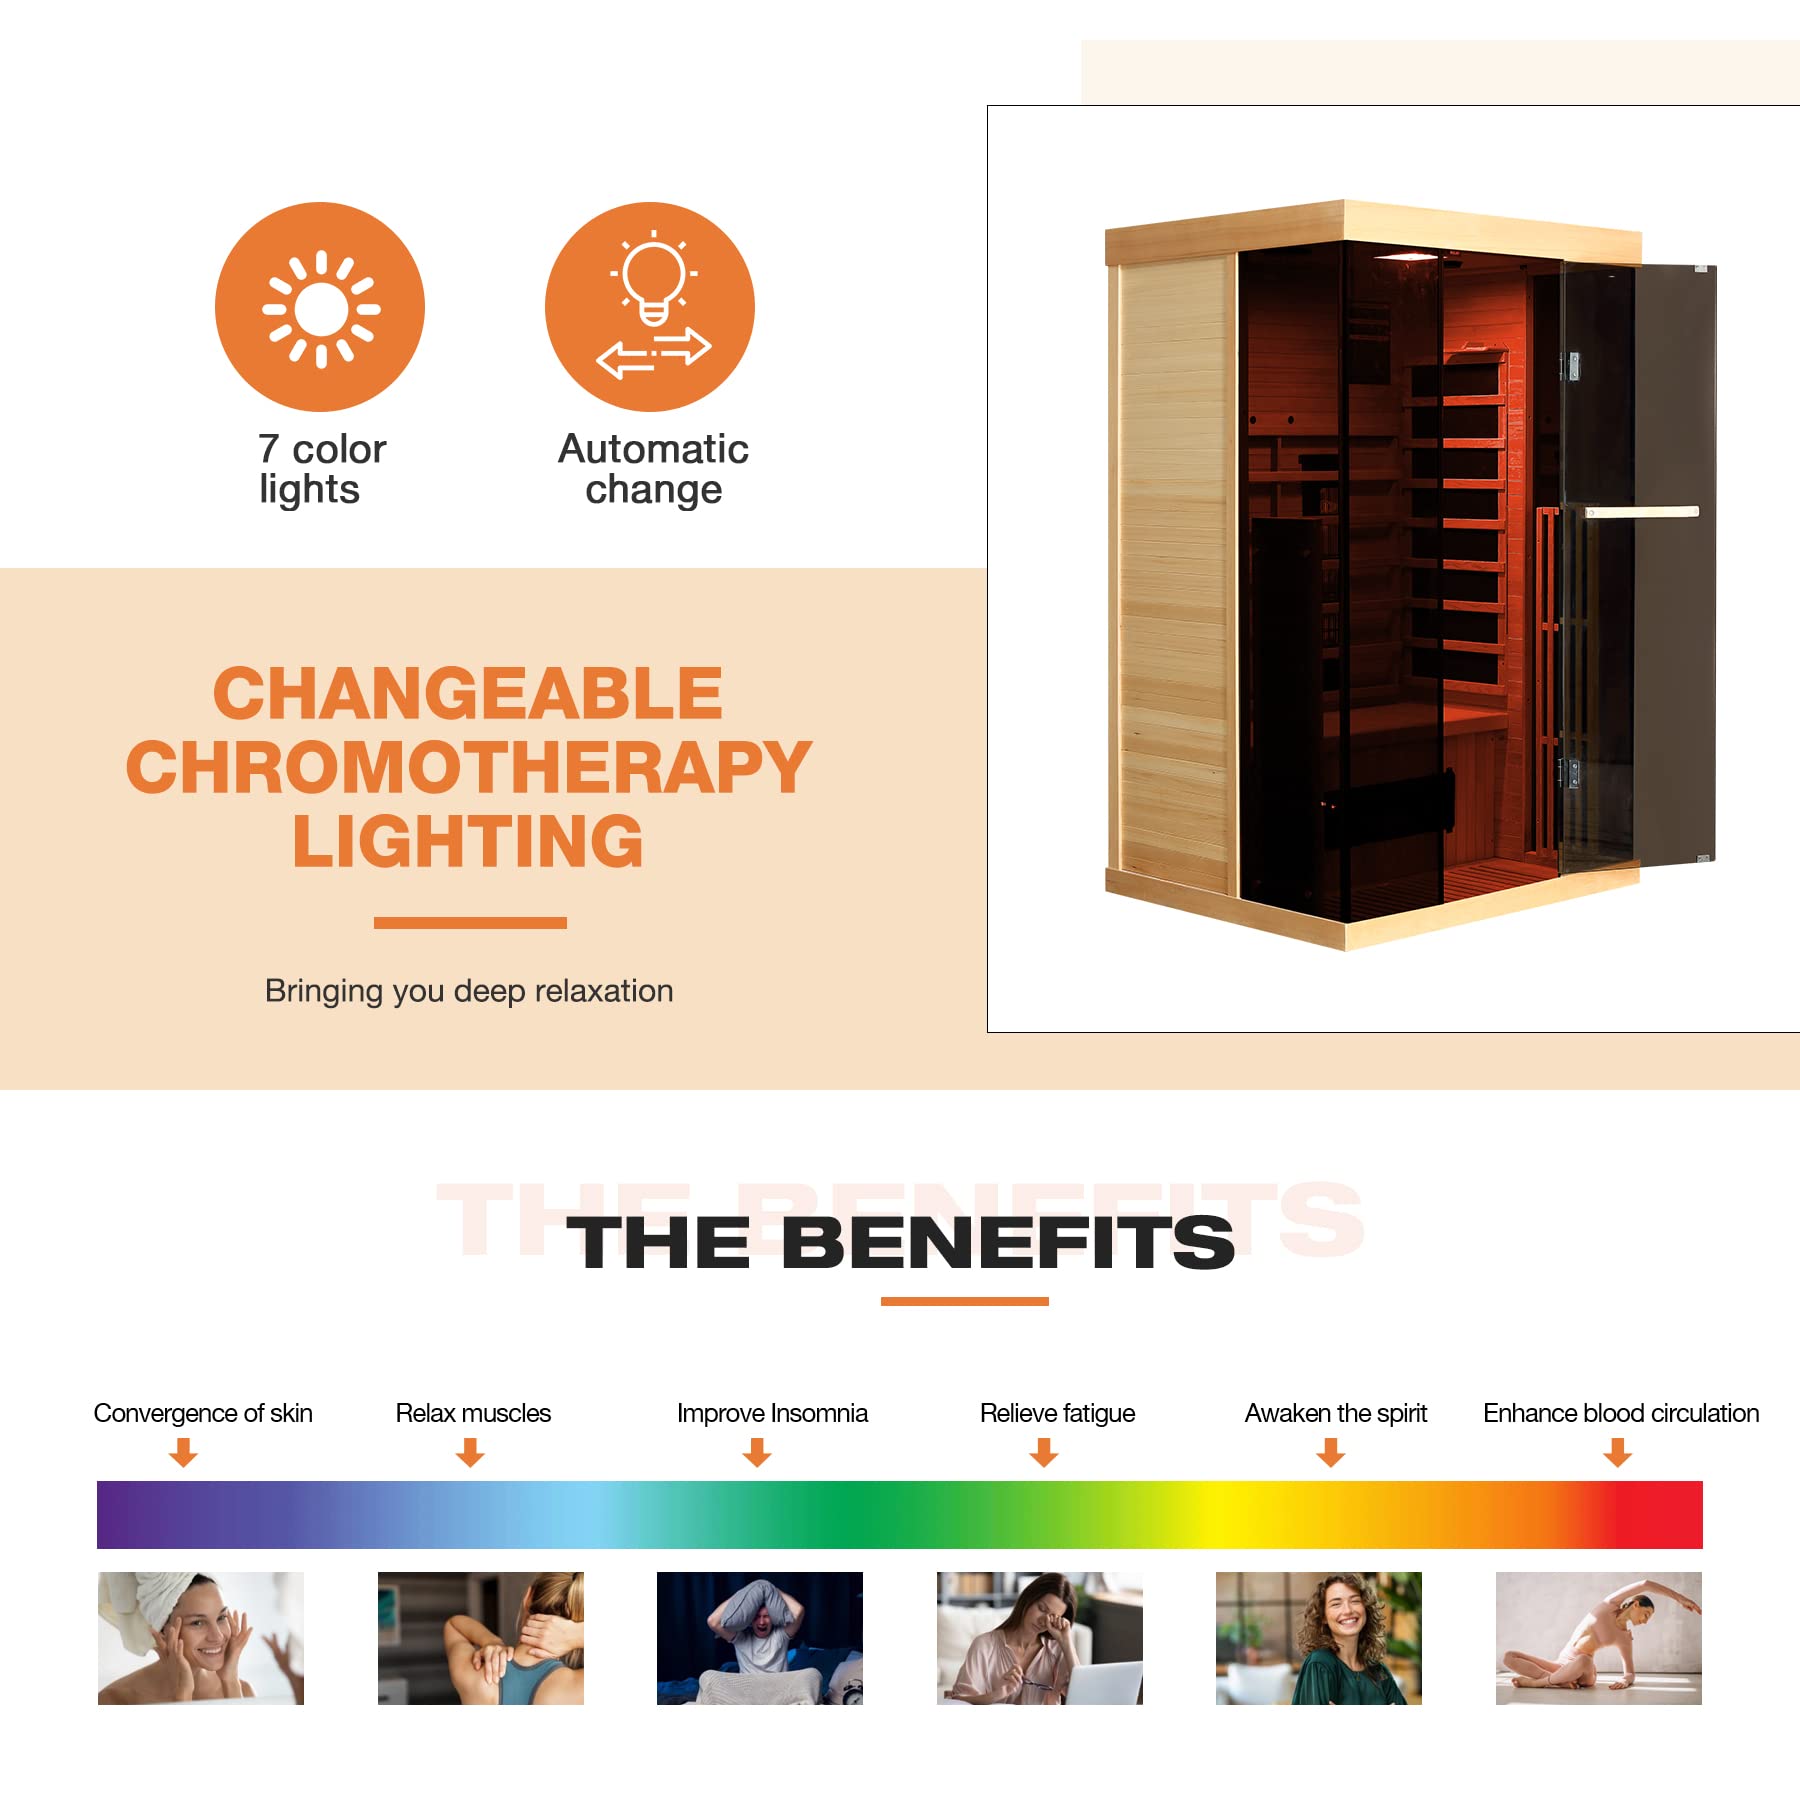 BNEHS Infrared Sauna, 1-2 Person Home Sauna with 10 Minutes Warm-up Heater Tube& Carbon Panels, Personal Sauna for Home with Door Handle to Hold Cell Phones and IPad, Panoramic Tempered Glass